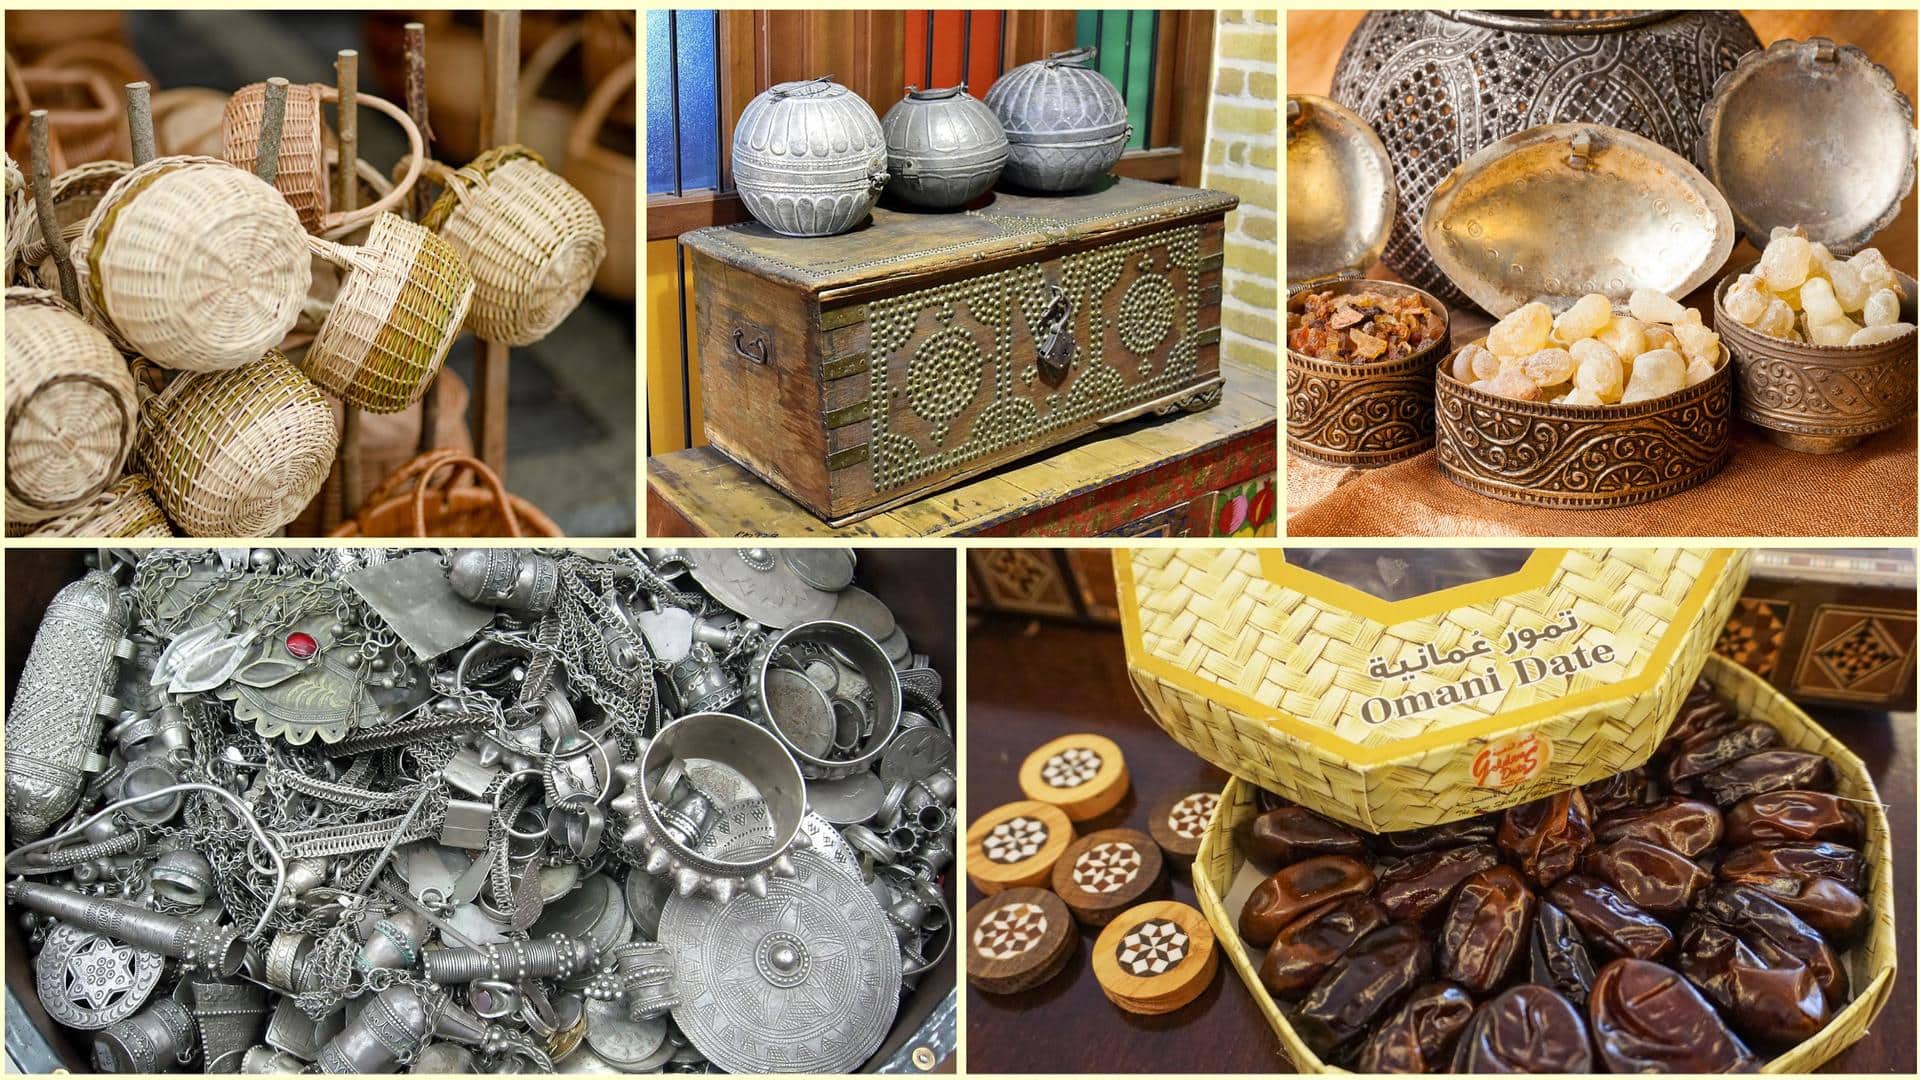 When in Oman, don't forget to shop for these souvenirs